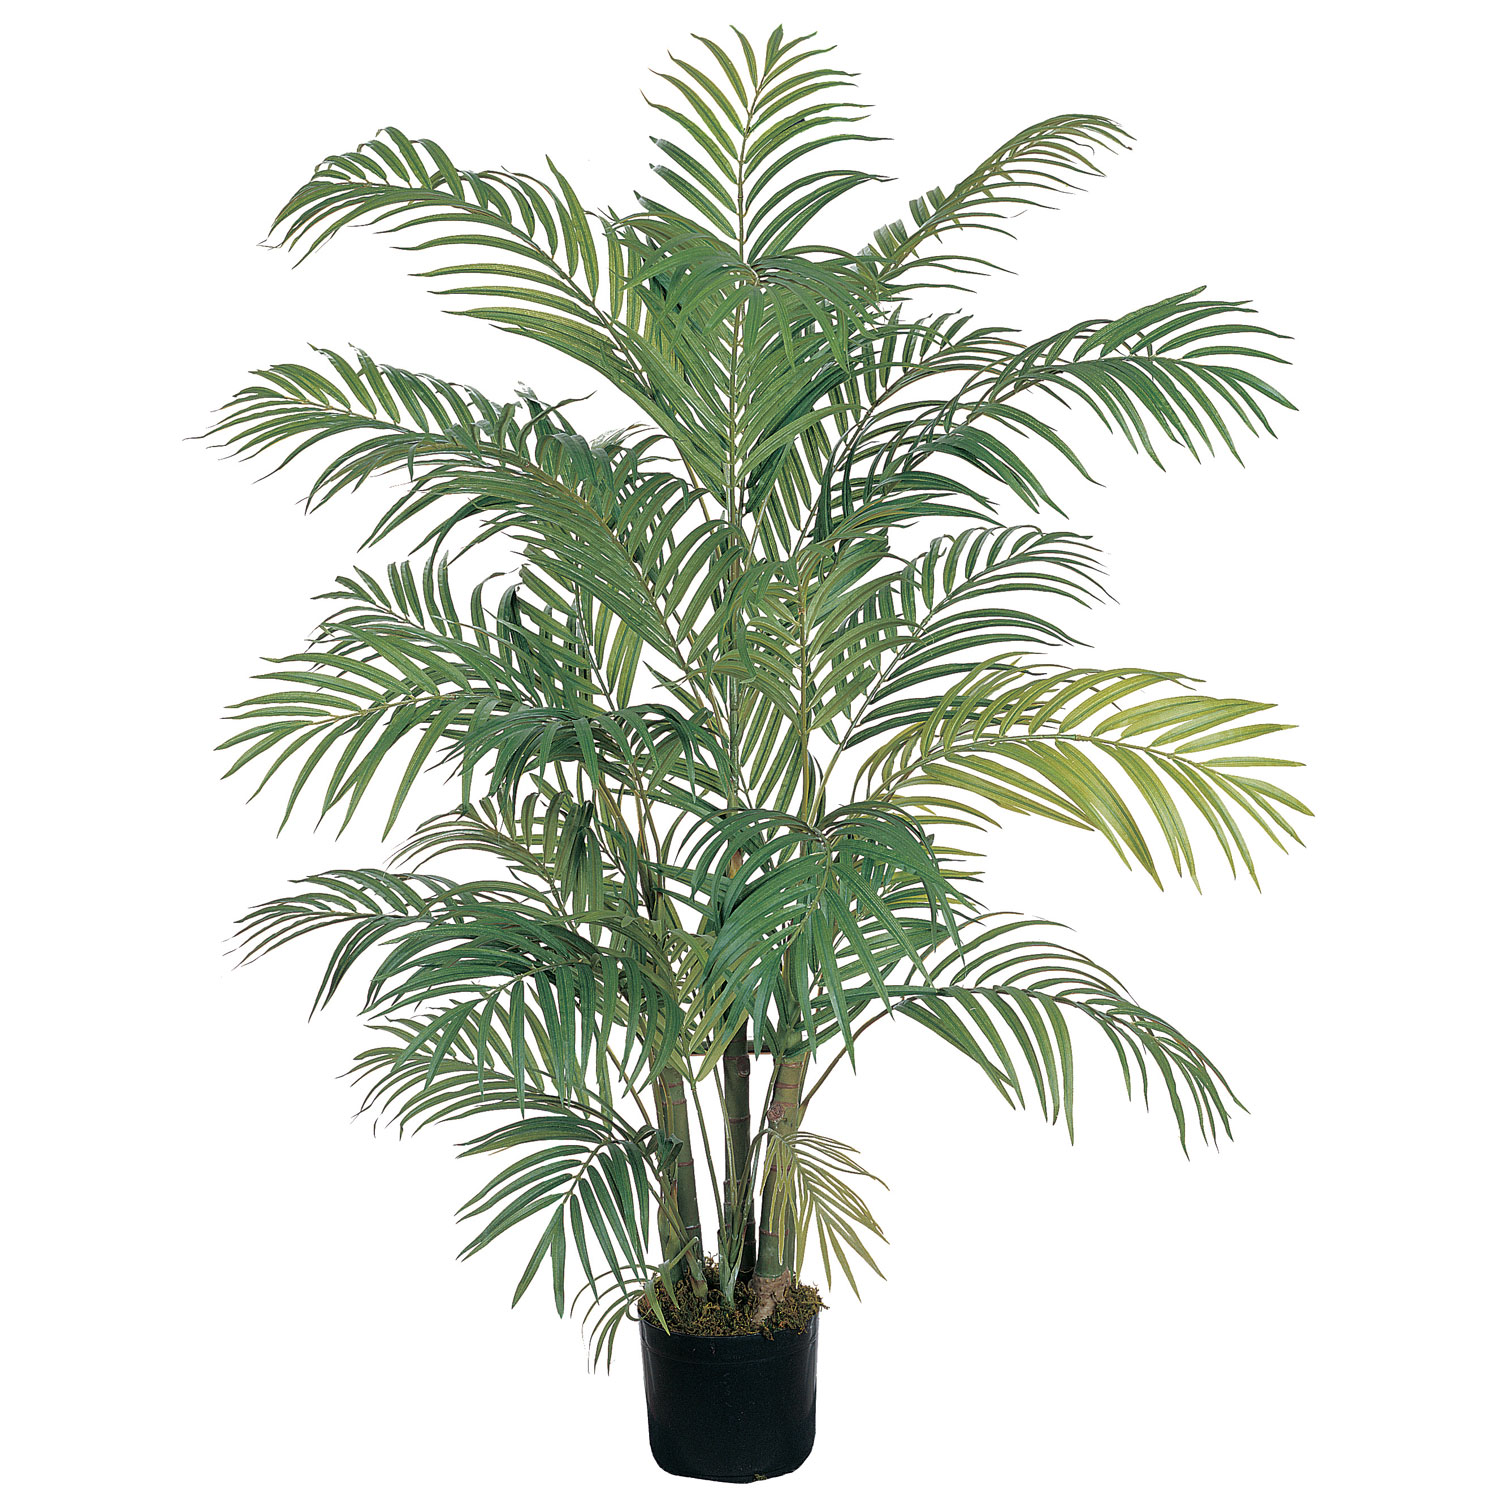 4 Foot Areca Palm Tree: Potted